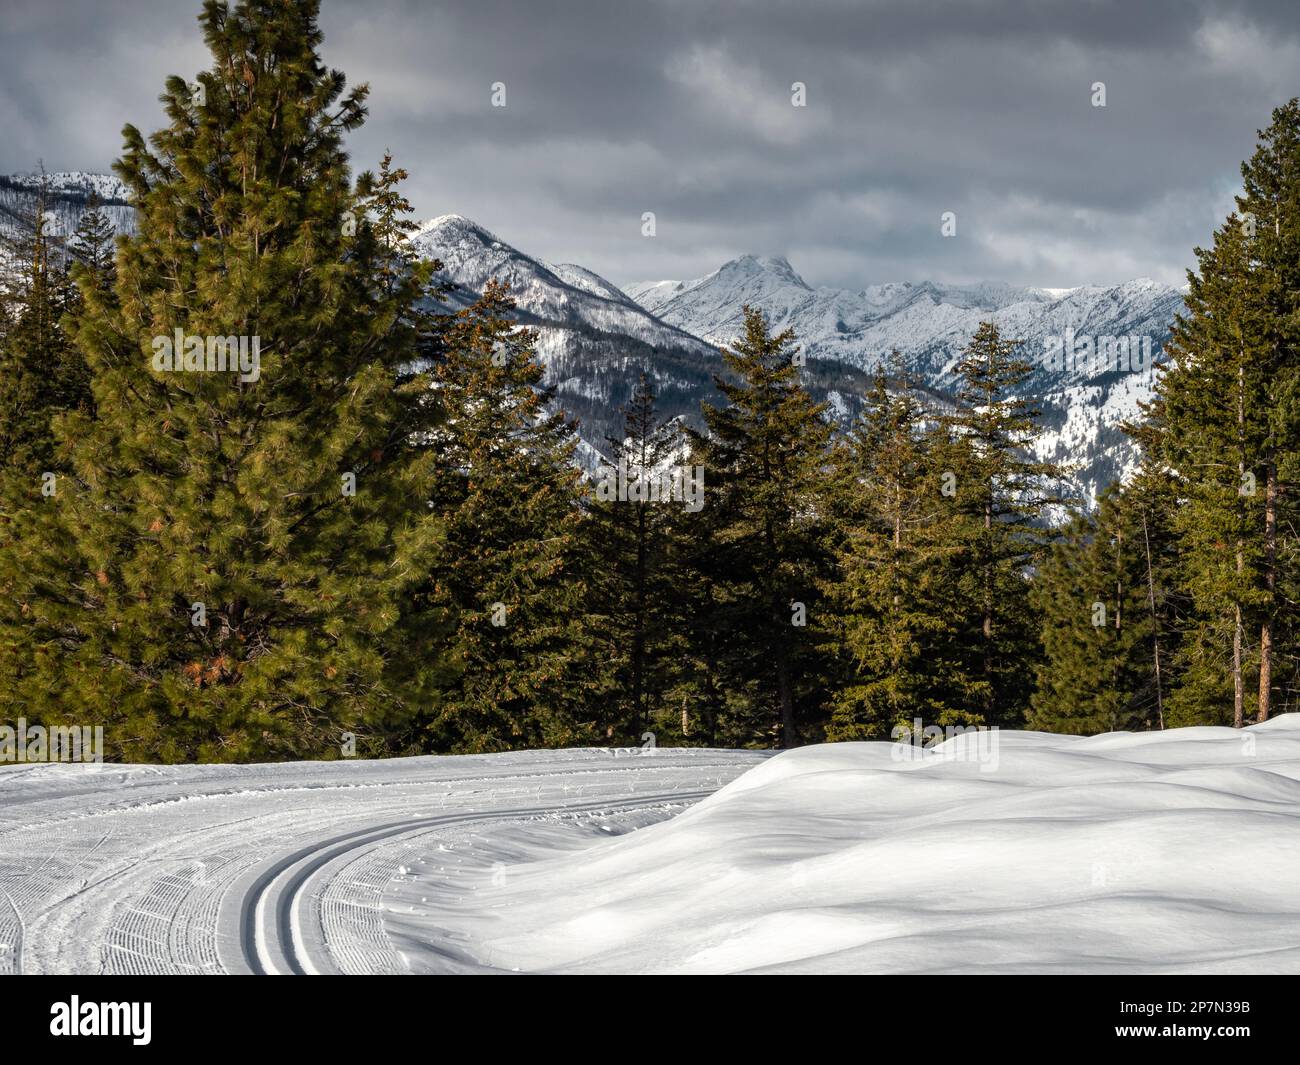 WA23232-00...WASHINGTON - View of the North Cascades from the Lower Fawn Creek cross-country ski trail, Rendezvous Trail system in the Methow Valley. Stock Photo